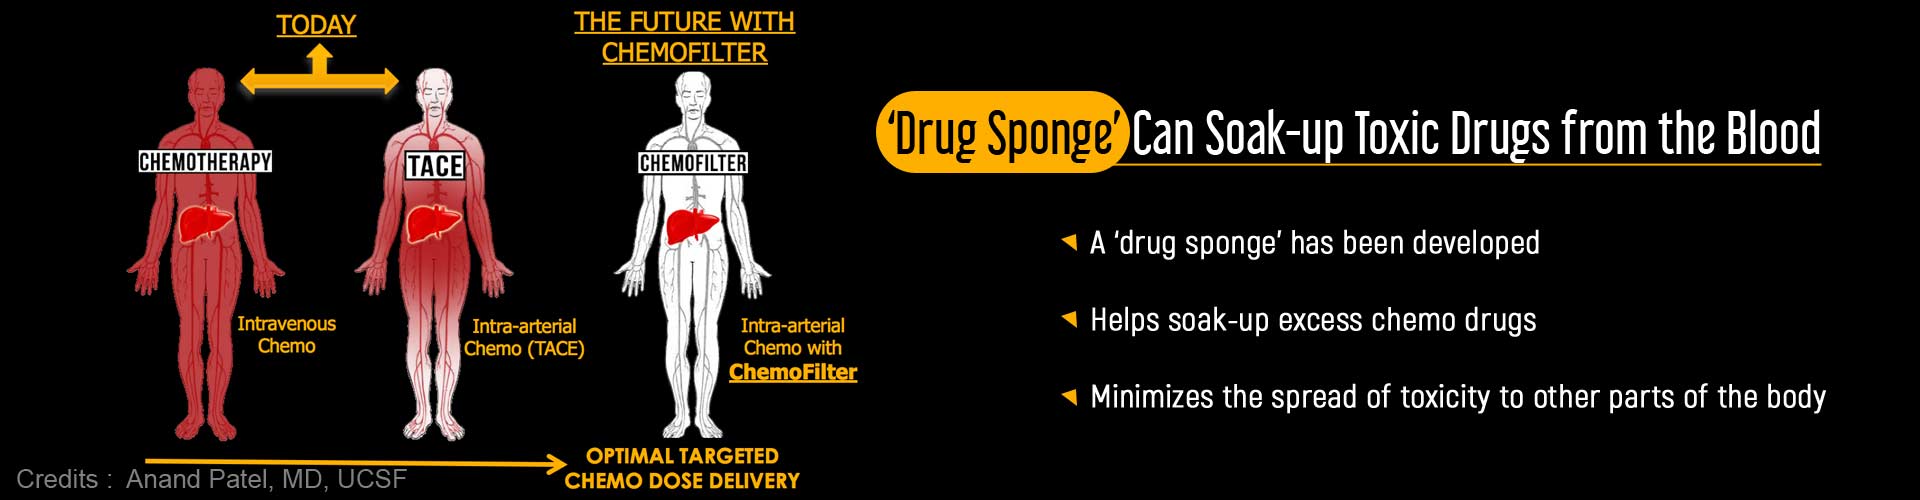 'Drug sponge' can soak-up toxic drugs from the blood. A 'drug sponge' has been developed. Helps soak-up excess chemo drugs. Minimizes the spread of toxicity to other parts of the body.